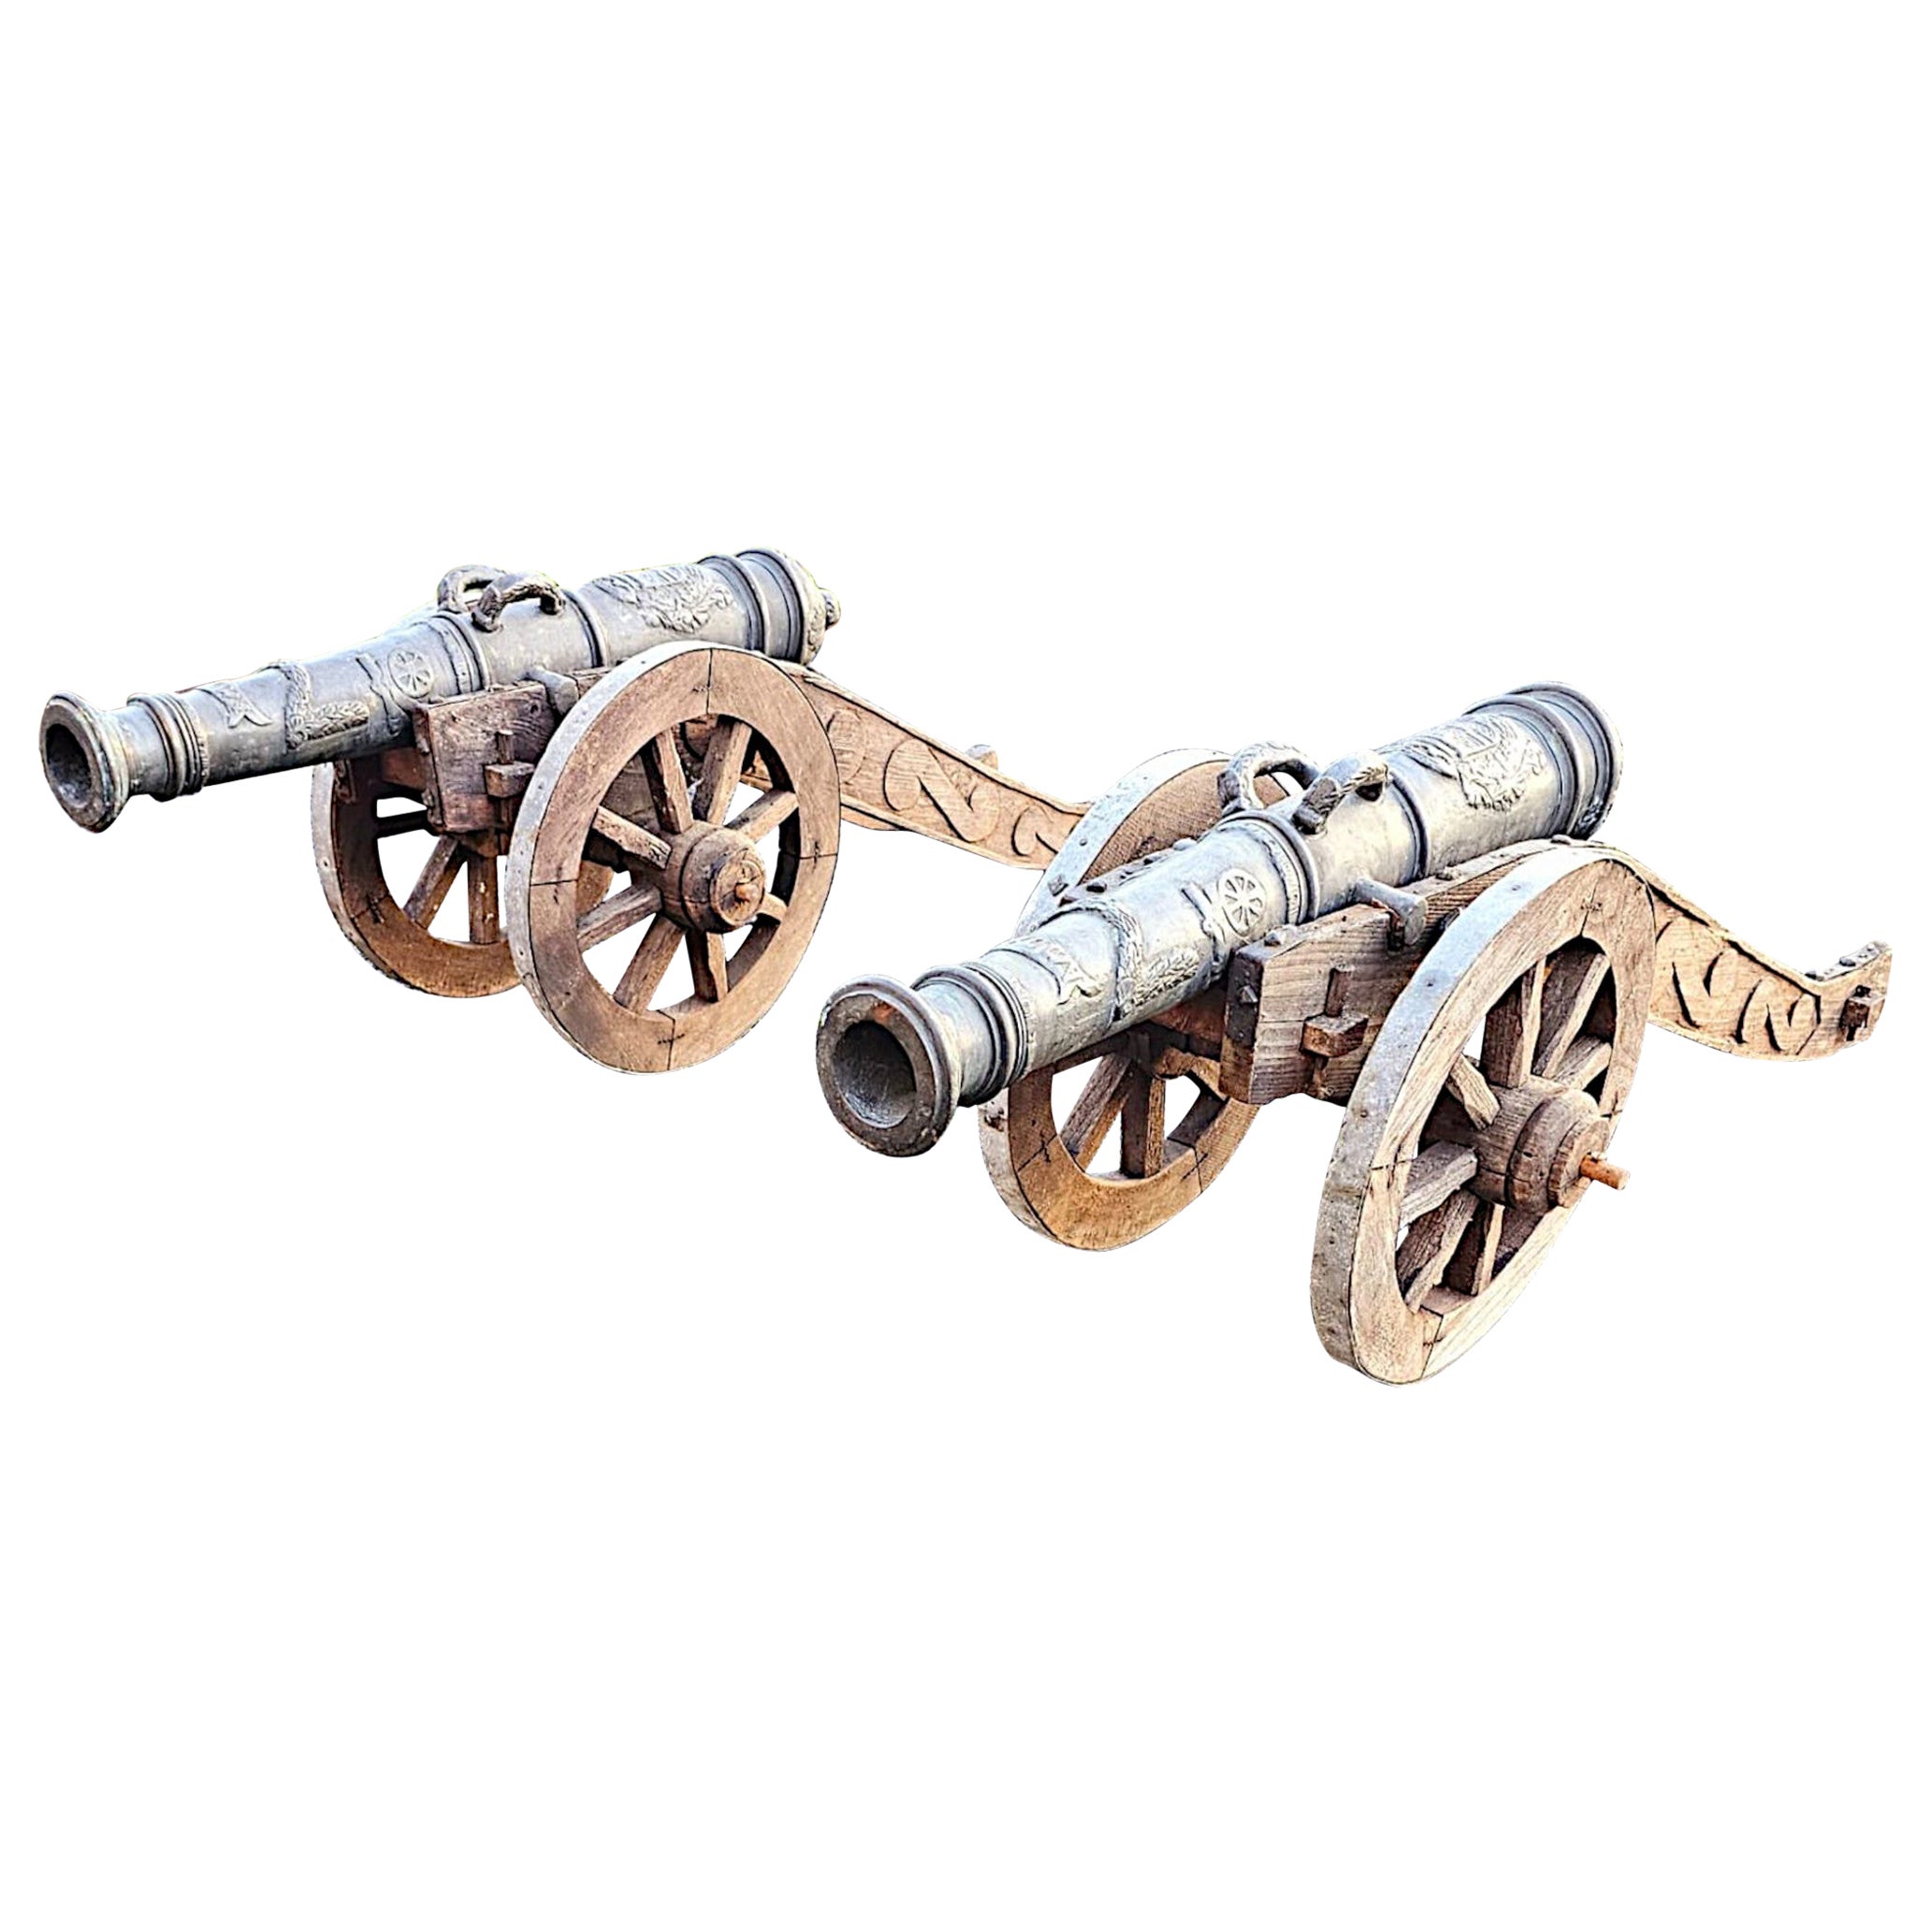 A  Rare Pair of 19th Century Bronze Barrelled Signal Cannons on Timber Base